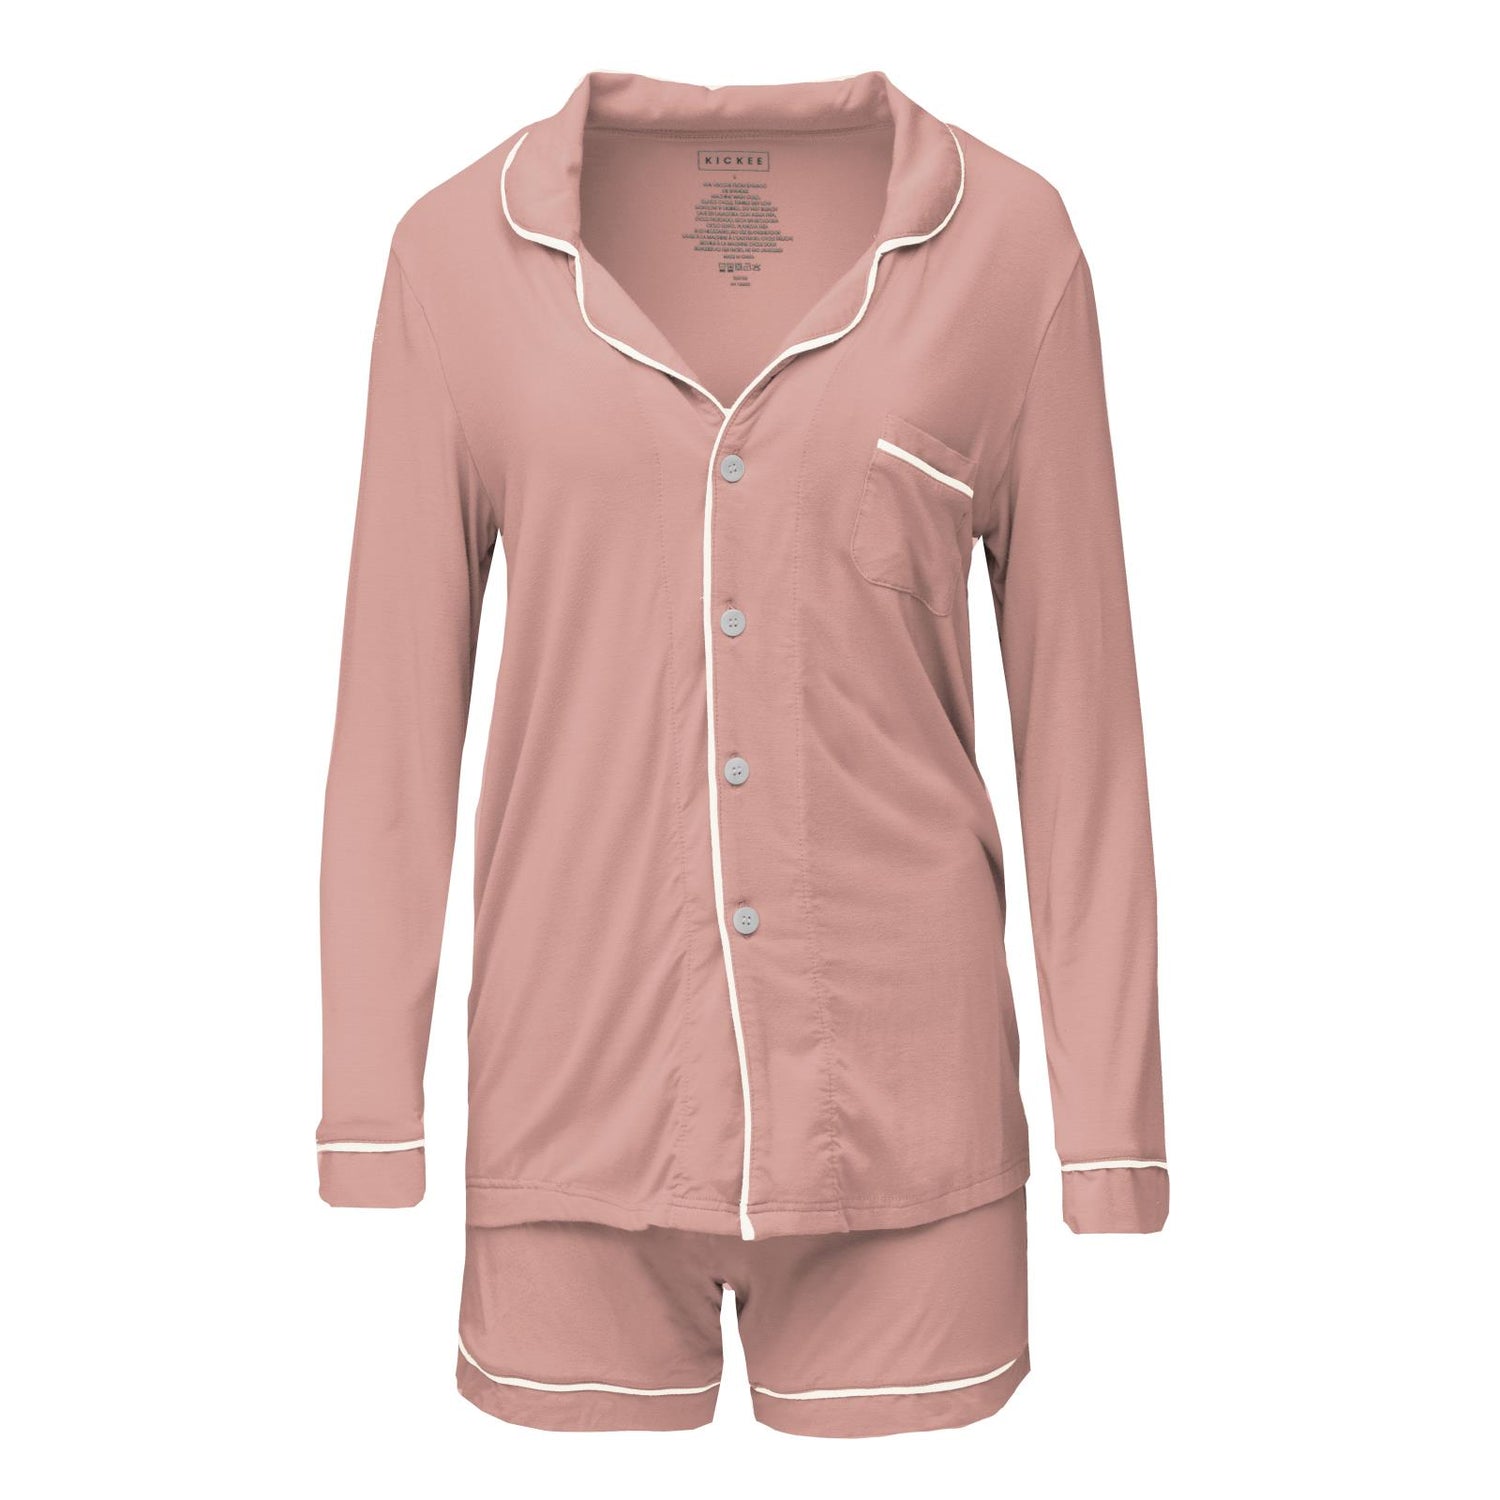 Women's Long Sleeve Collared Pajama Set with Shorts in Blush with Natural